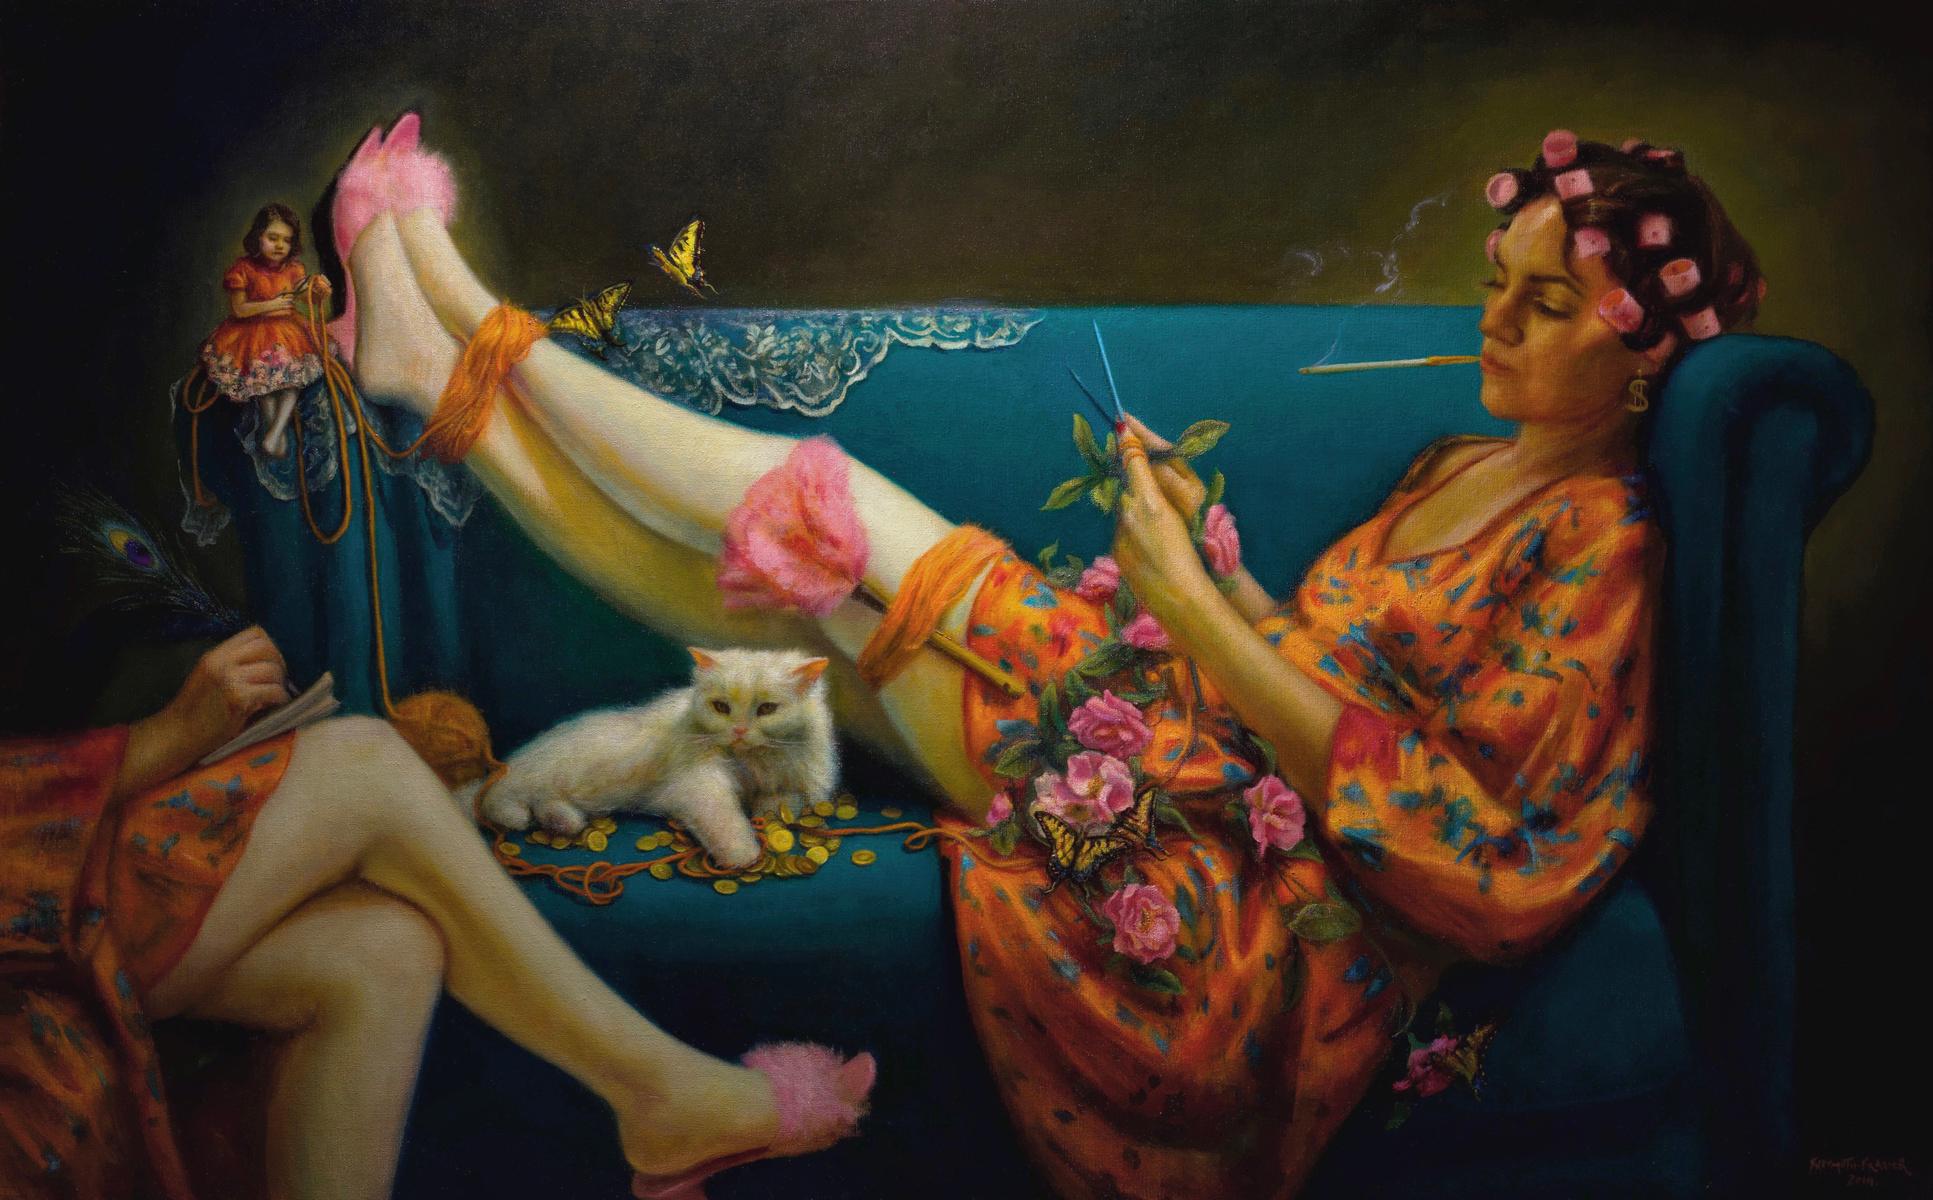 Rose Freymuth-Frazier Animal Painting - Self-Made,  Woman Lounging on Teal Couch with Persian Cat, Original Oil Painting